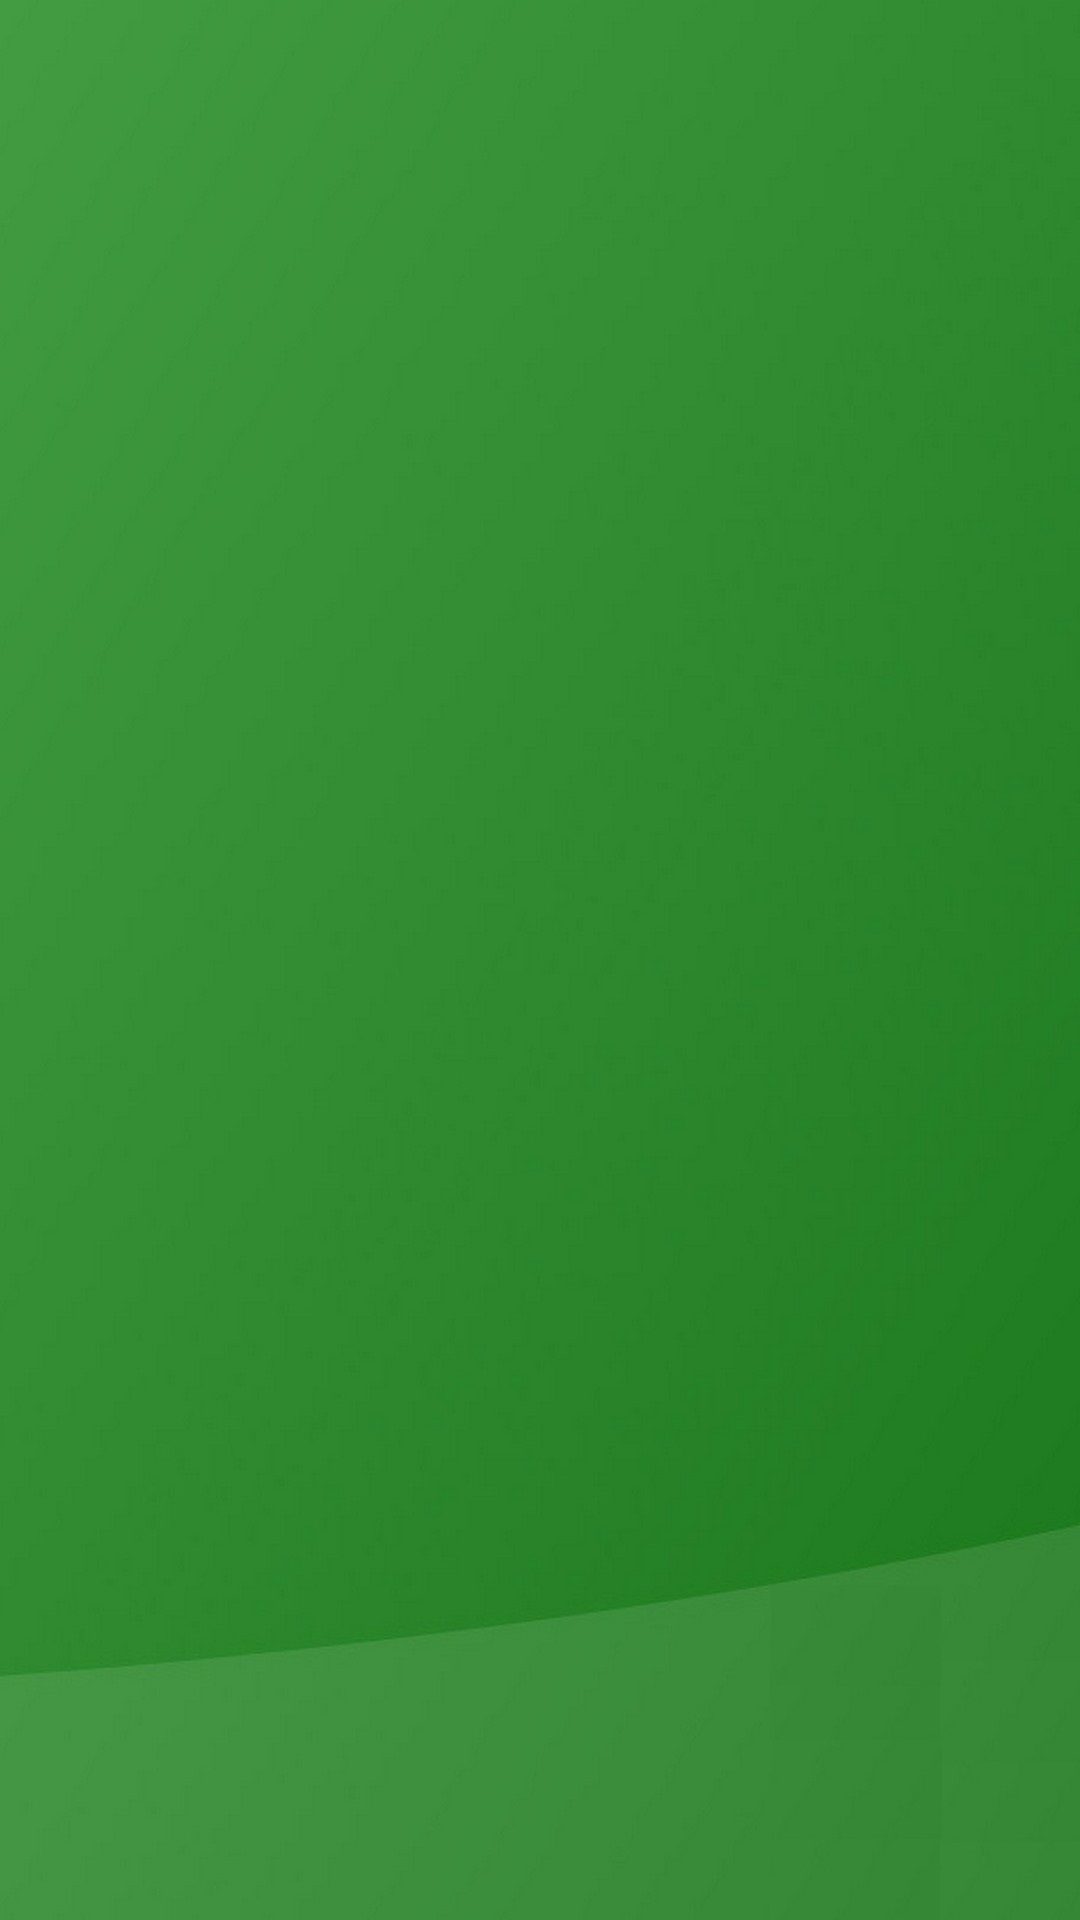 Green HD Wallpapers For Android with image resolution 1080x1920 pixel. You can make this wallpaper for your Android backgrounds, Tablet, Smartphones Screensavers and Mobile Phone Lock Screen